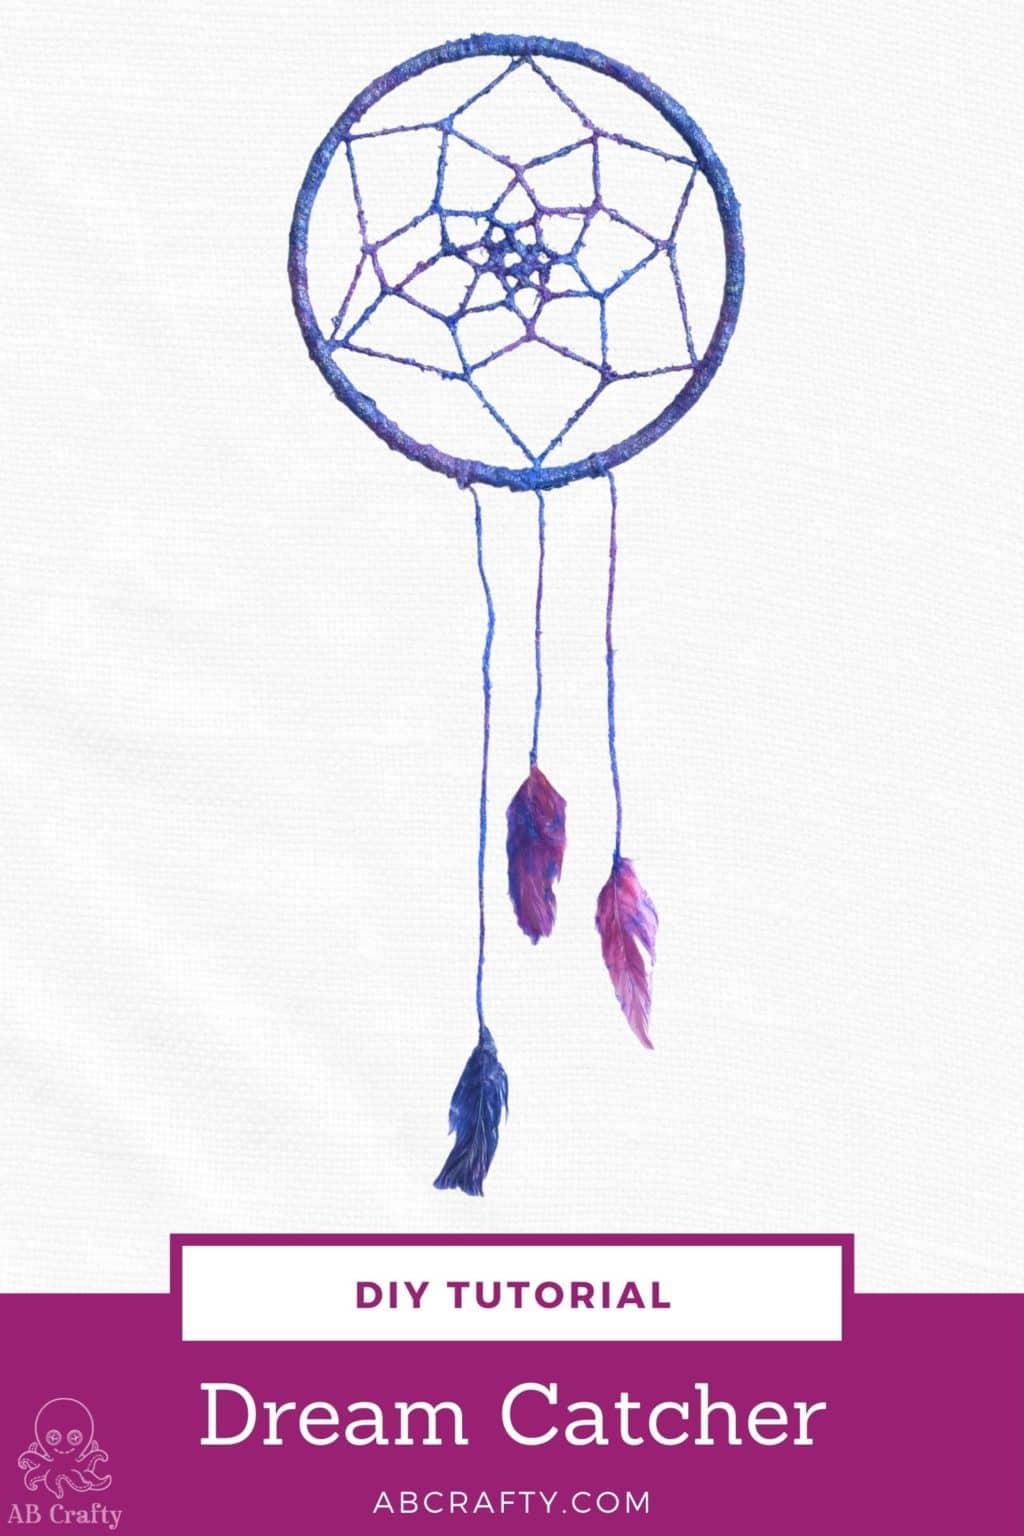 How to draw a dream catcher - B+C Guides